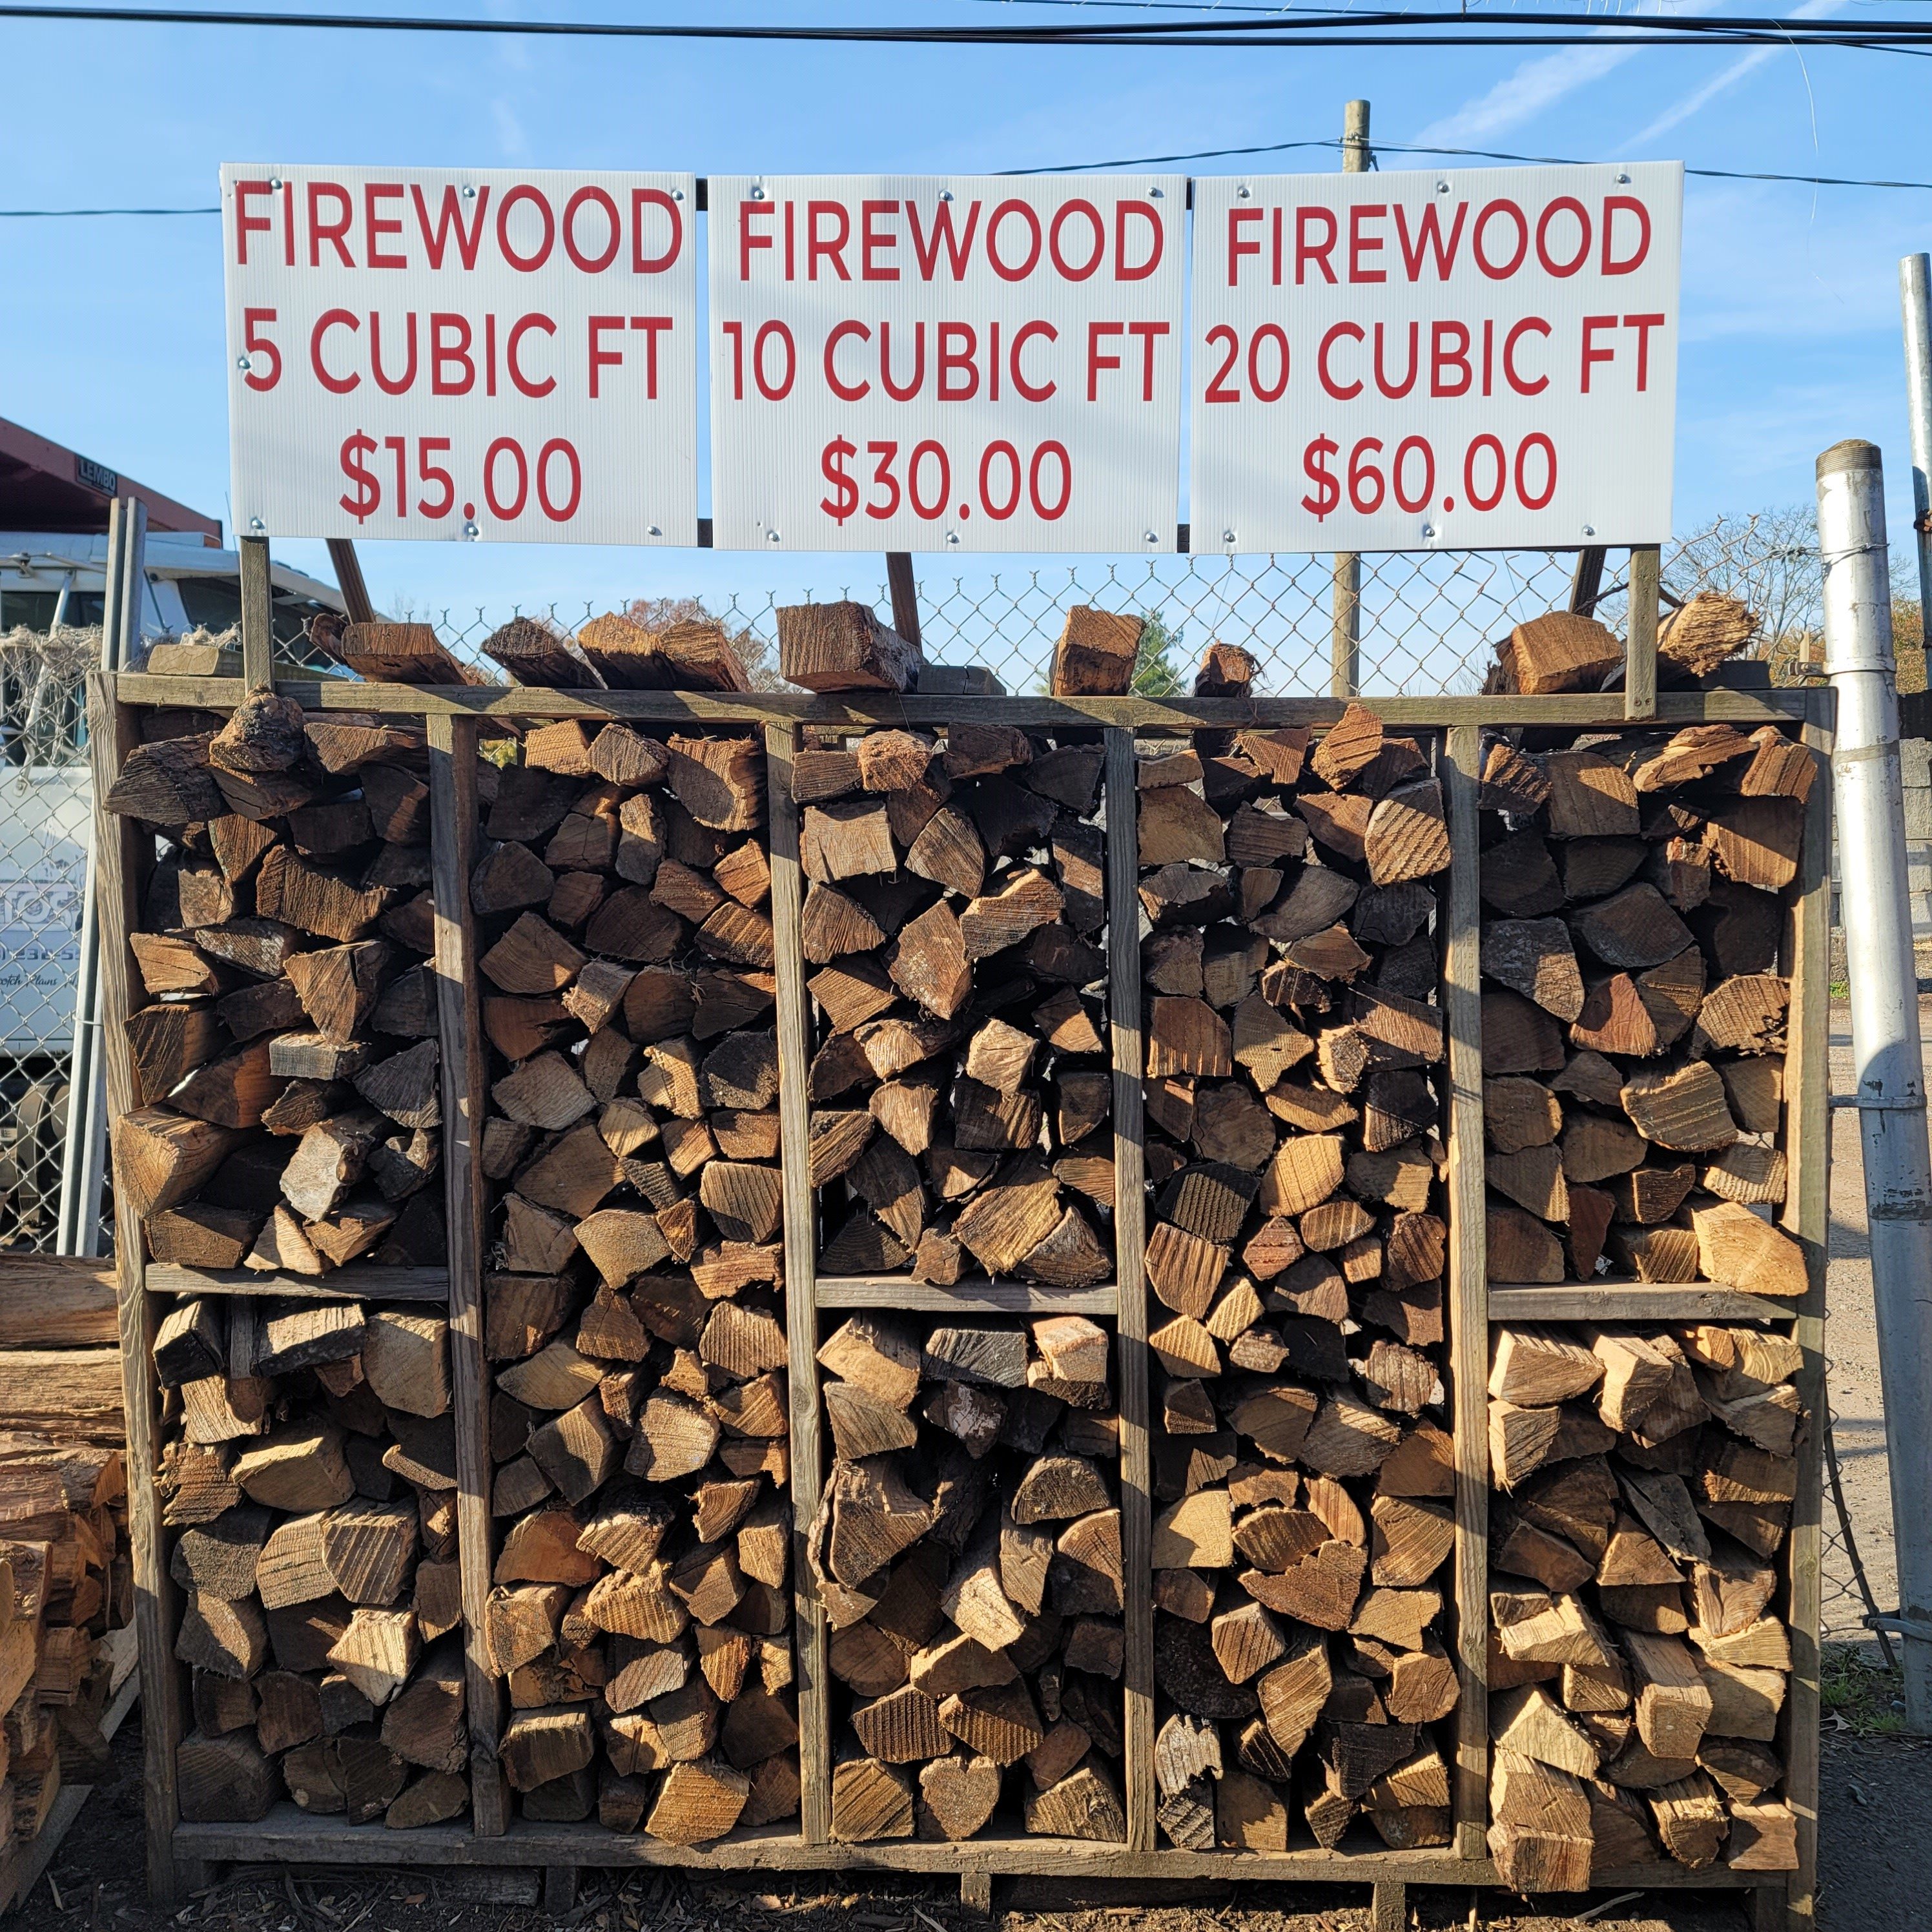 How Much is a Truck Load of Firewood? Find Out the Cost Today!